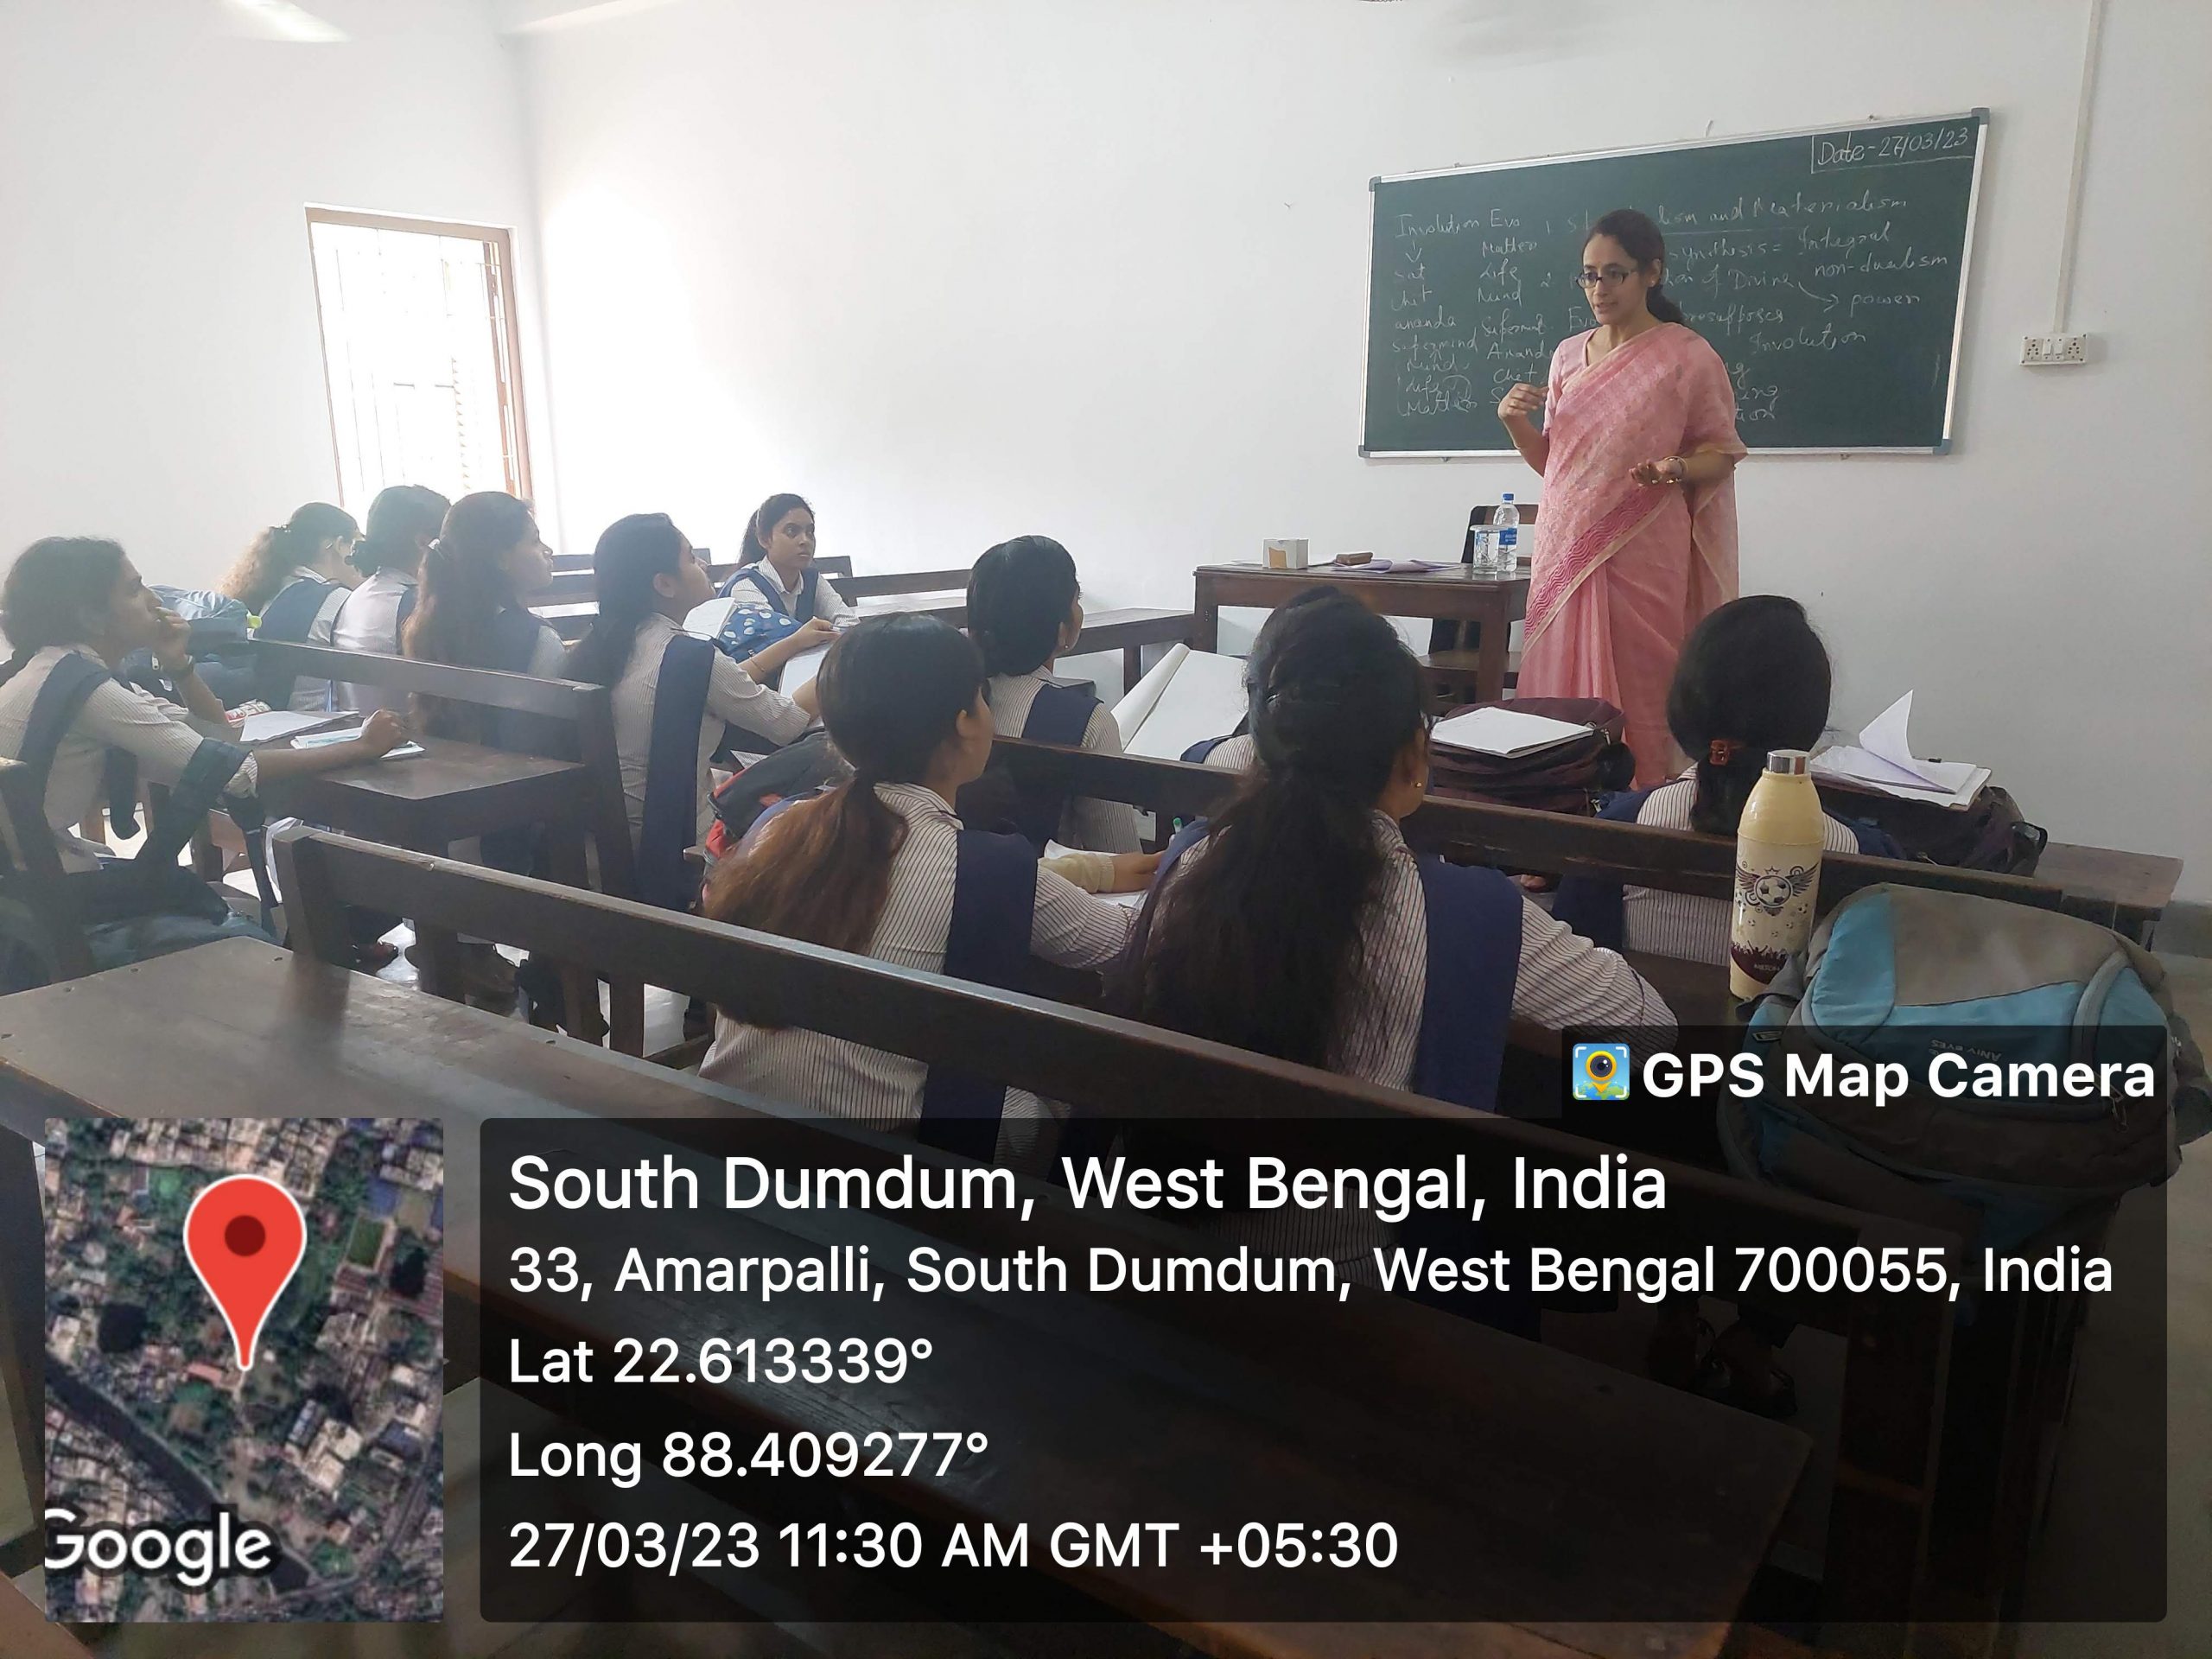 Extension Lecture organised by the department of Philosophy (Resource Person Dr. Sushmita Bhowmik Asst. Professor, Department of Philosophy, Diamond Harbour Women’s University